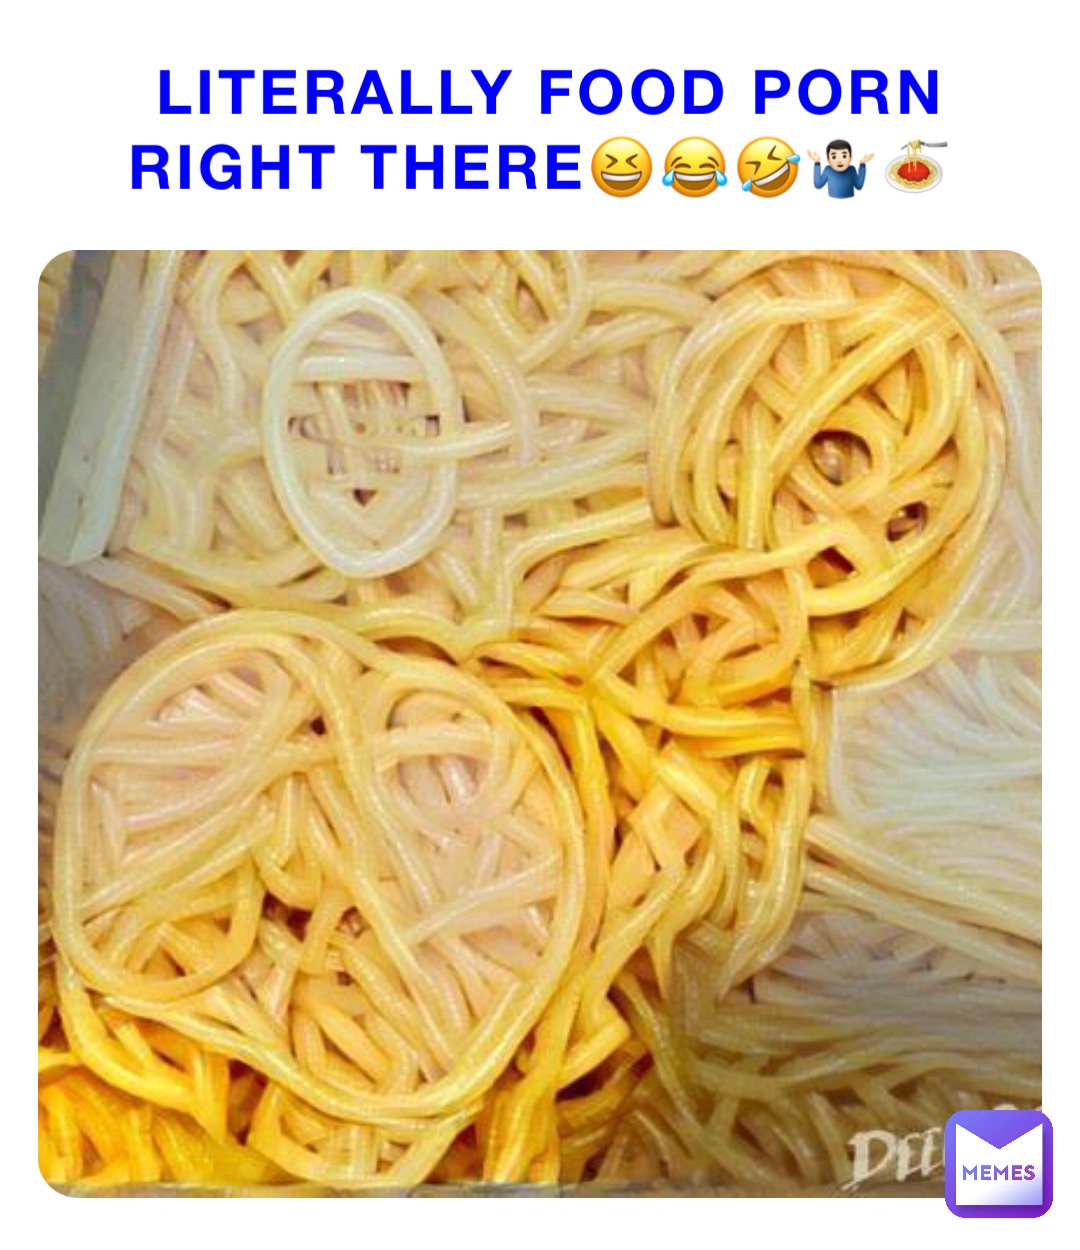 Literally Food Porn right there😆😂🤣🤷🏻‍♂️🍝